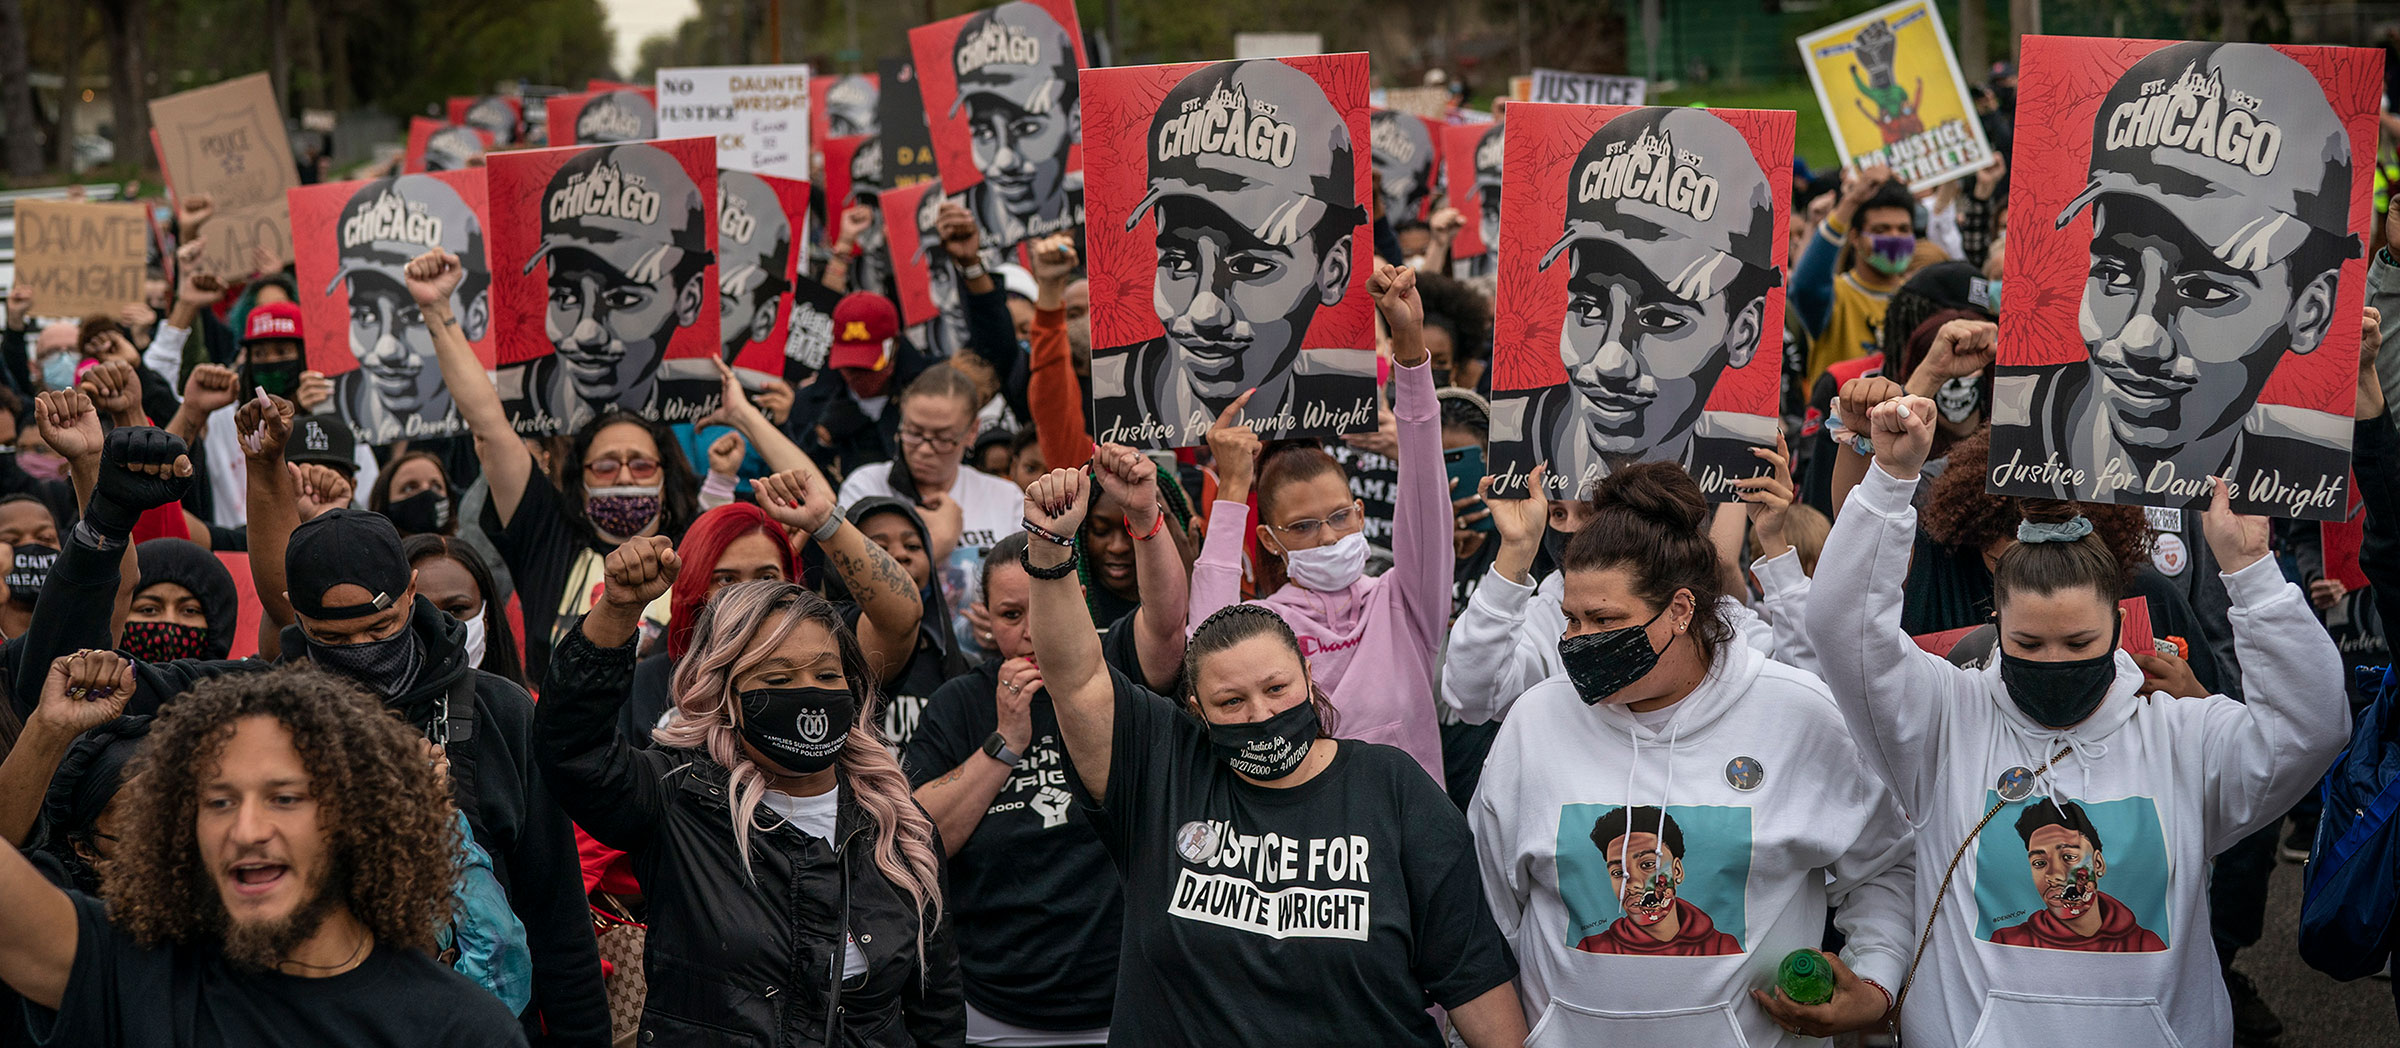 Katie Wright (center) surrounded by supporters marched to the Brooklyn Center Police department, demanding justice for her son Daunte Wright In Brooklyn Center, MN. (Jerry Holt—Star Tribune/Getty Images)